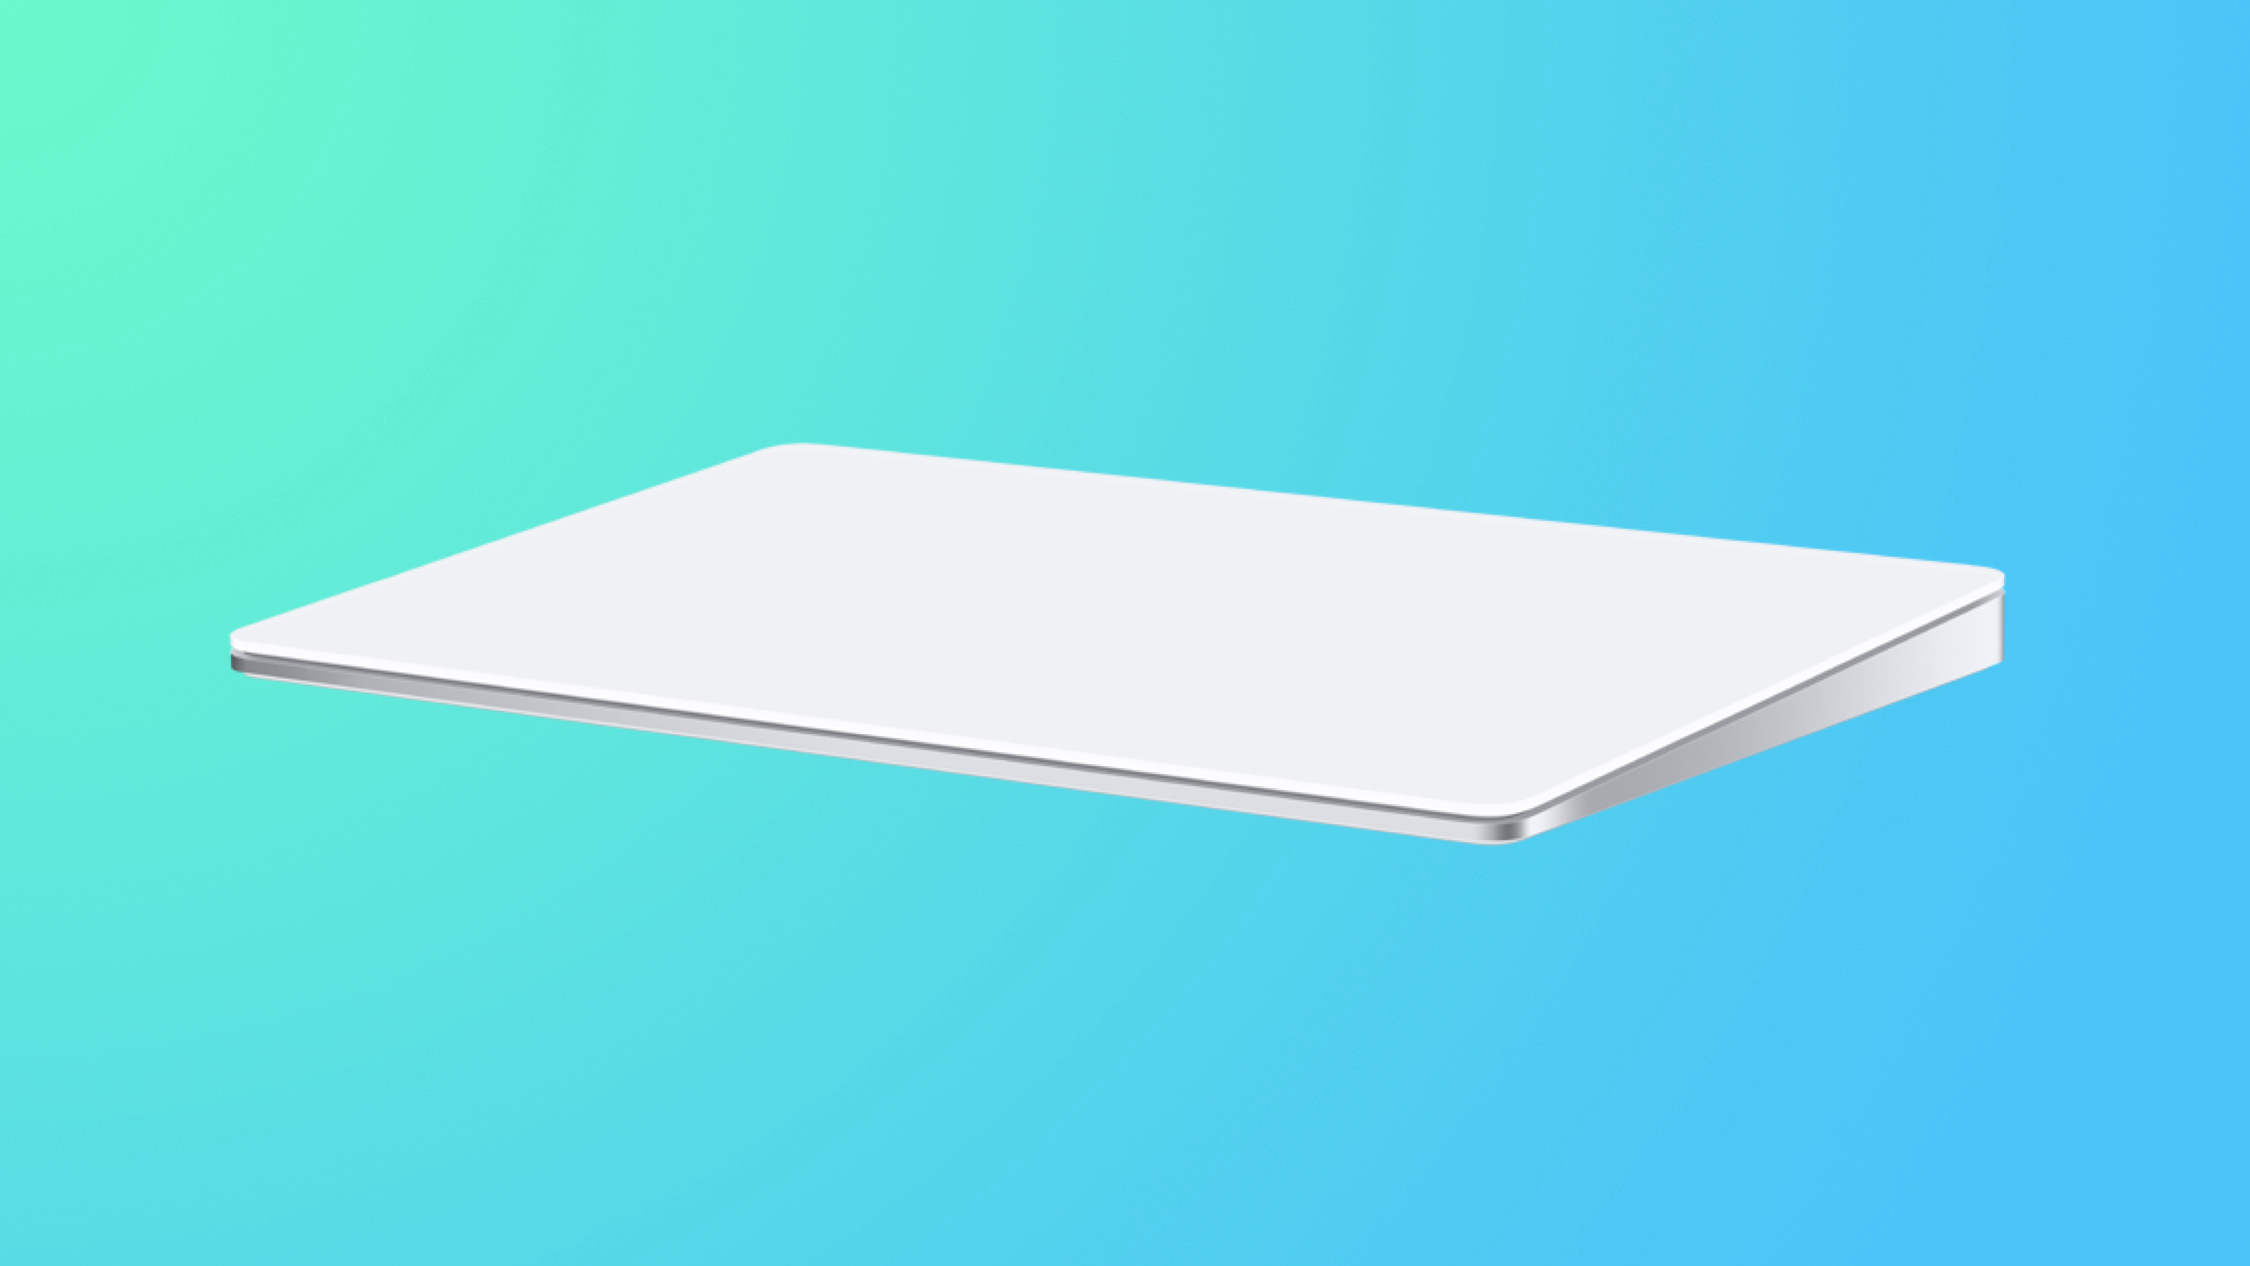 Deals: Magic Trackpad 2 Discounted to Low Price of $84.99 ($44 Off)